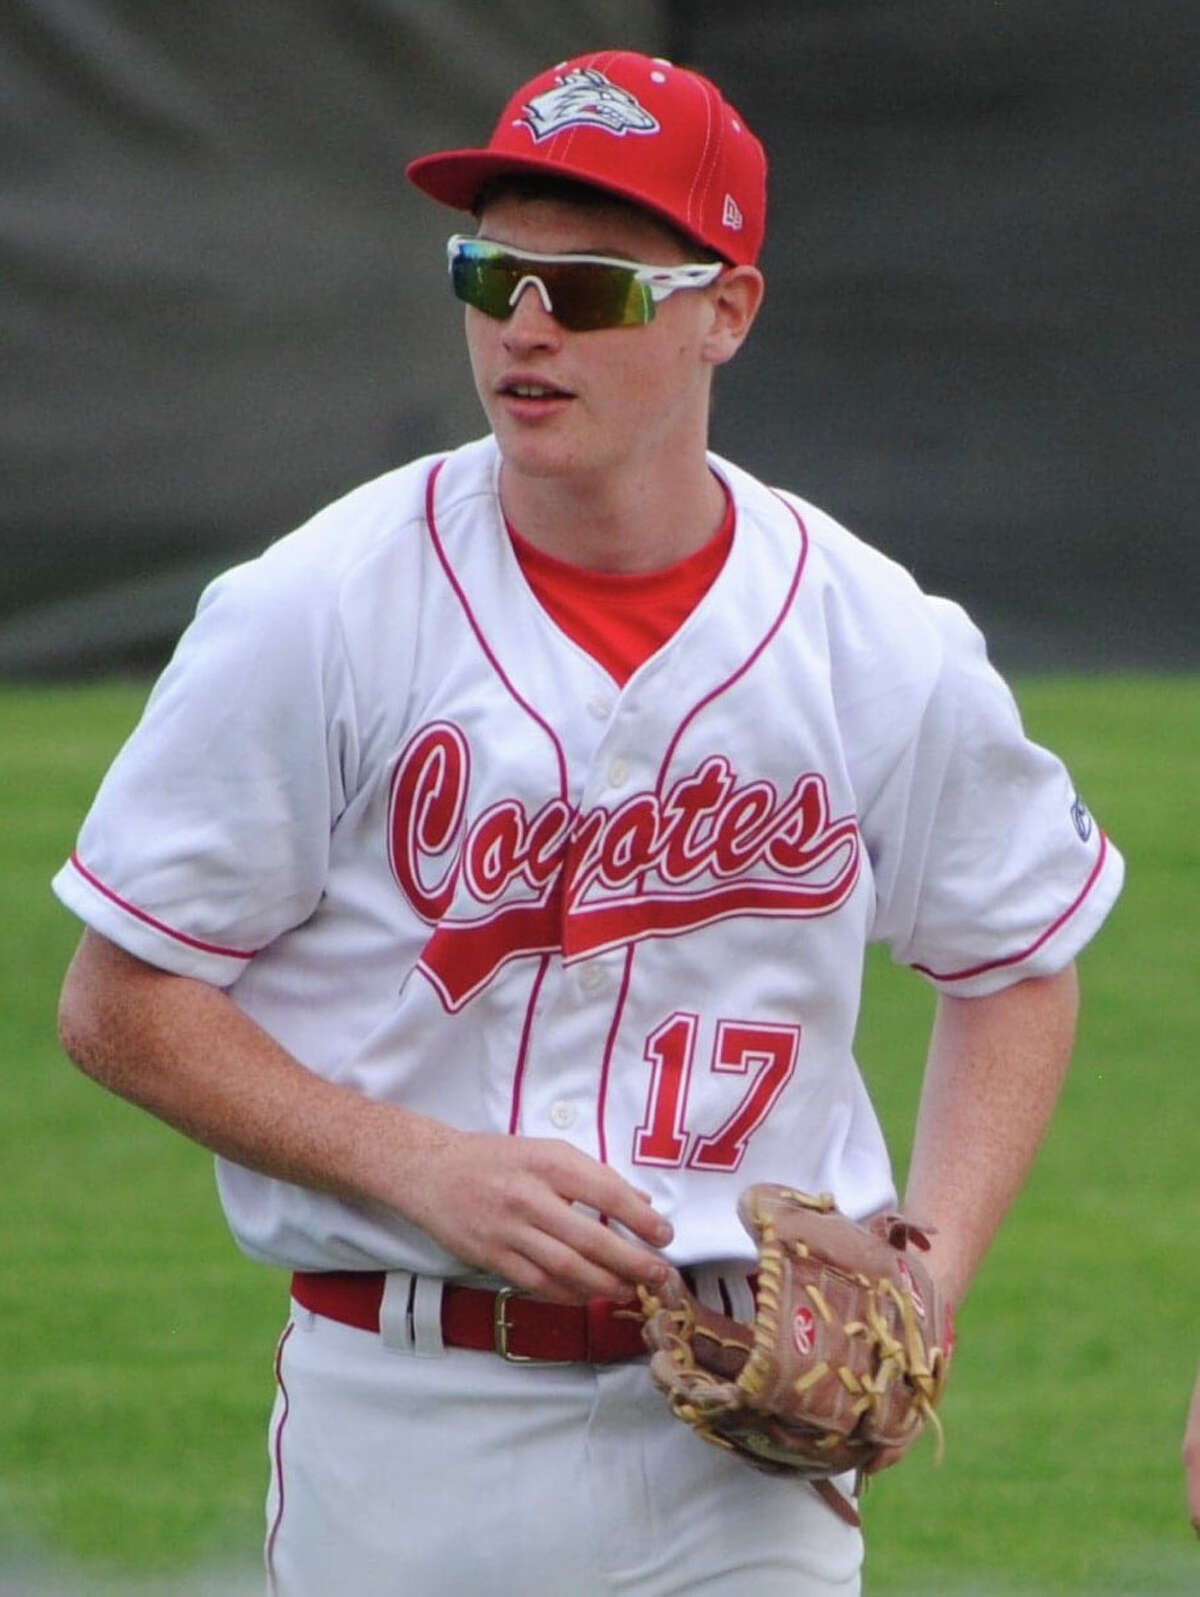 Trent Howell has been a key contributor for Reed City's baseball team.